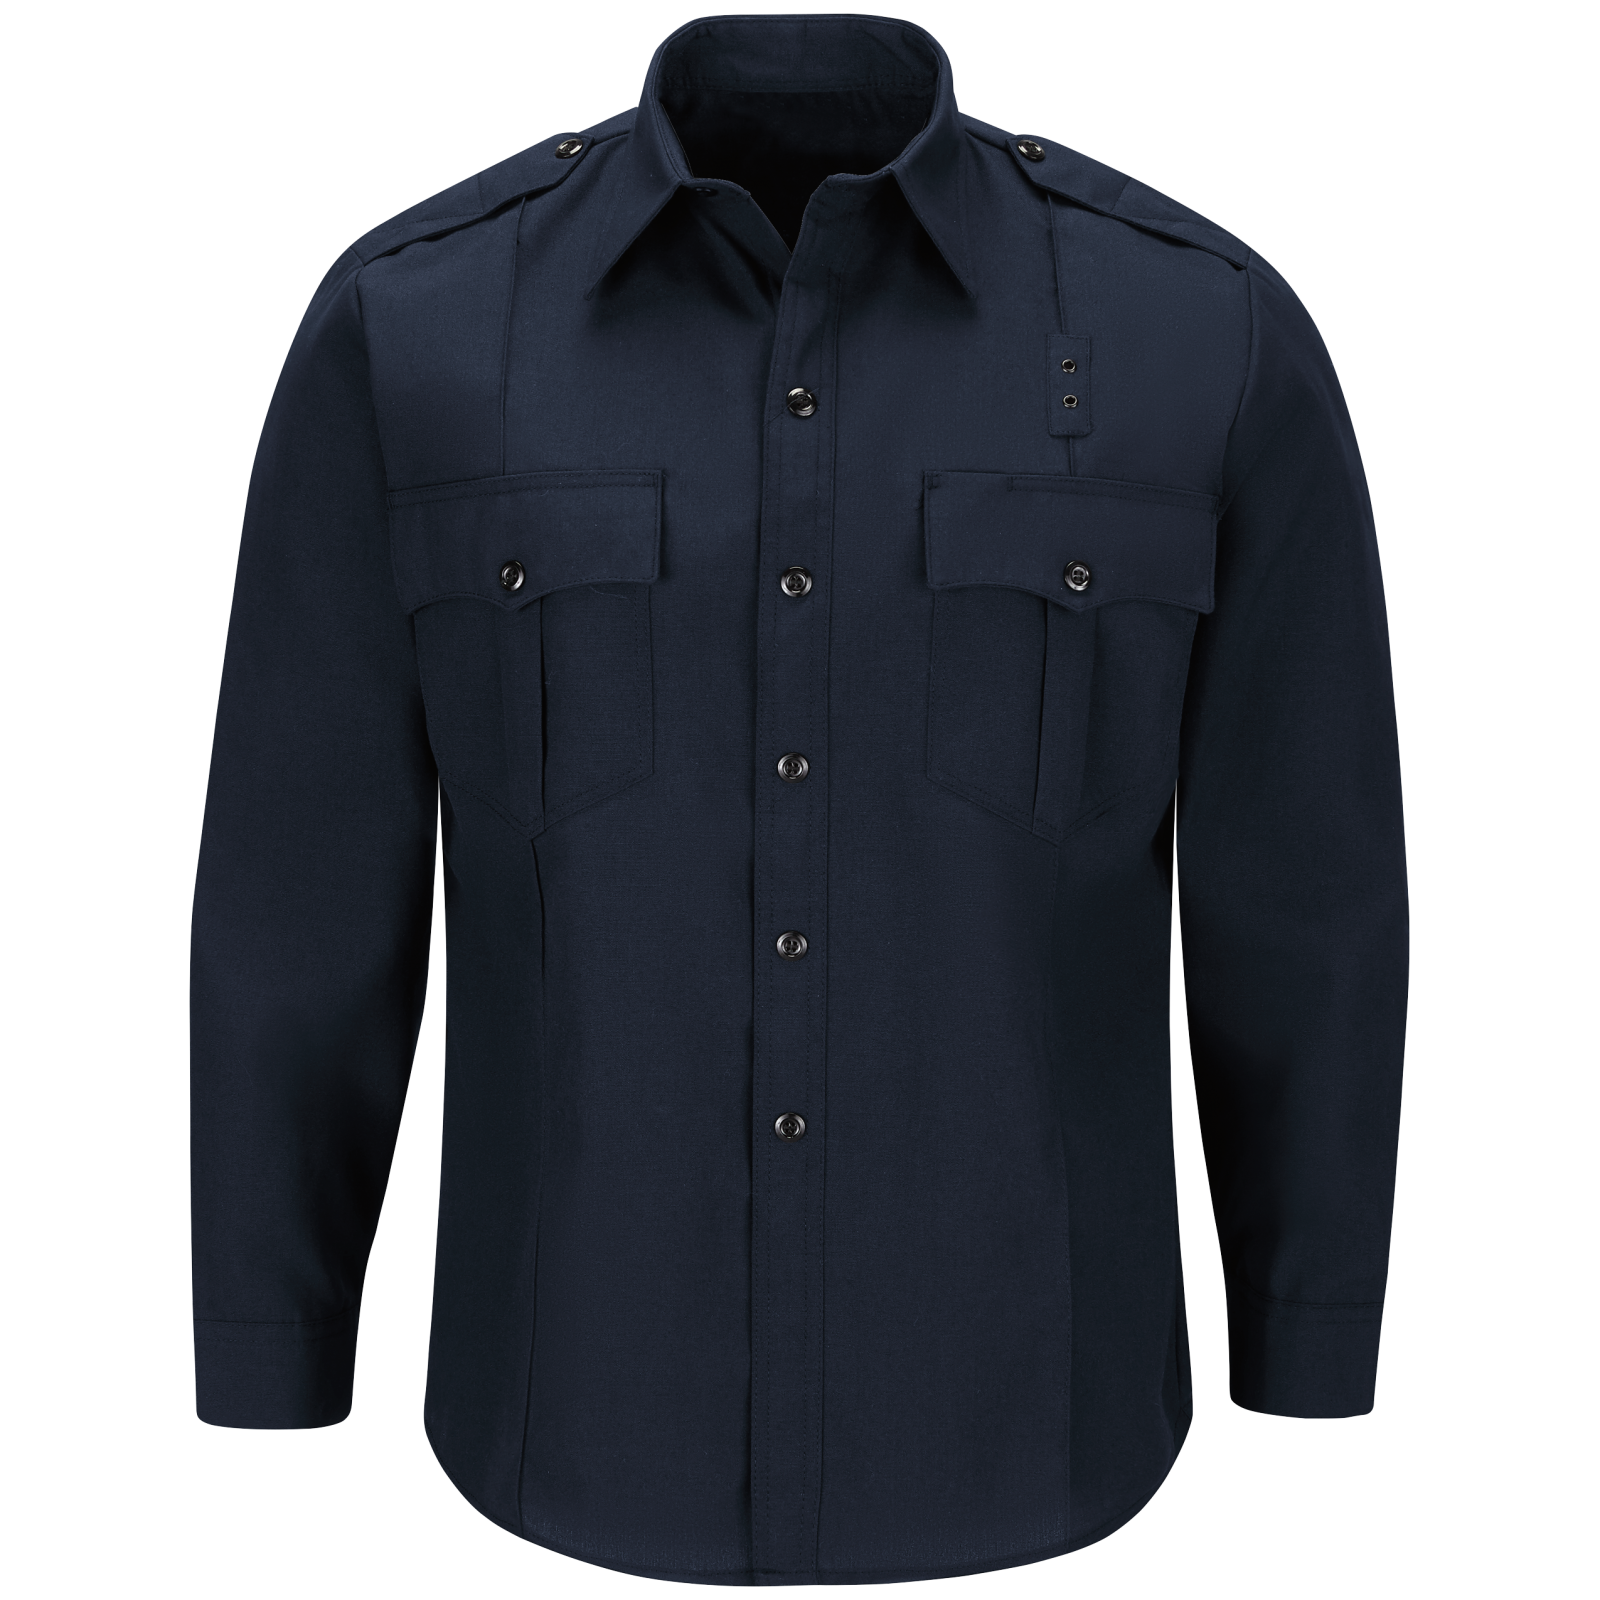 Workrite Men's Classic Long Sleeve Fire Officer Shirt (FSE0) |  The Fire Center | Fuego Fire Center | Store | FIREFIGHTER GEAR | FREE SHIPPING | Our classic Fire Officer's shirt is made with durable, flame-resistant Nomex® IIIA fabric and autoclaved using our proprietary PerfectPress® process to give you a professional appearance that lasts. Featuring details like lined, banded collars and reinforced stitching, designed to support your needs.